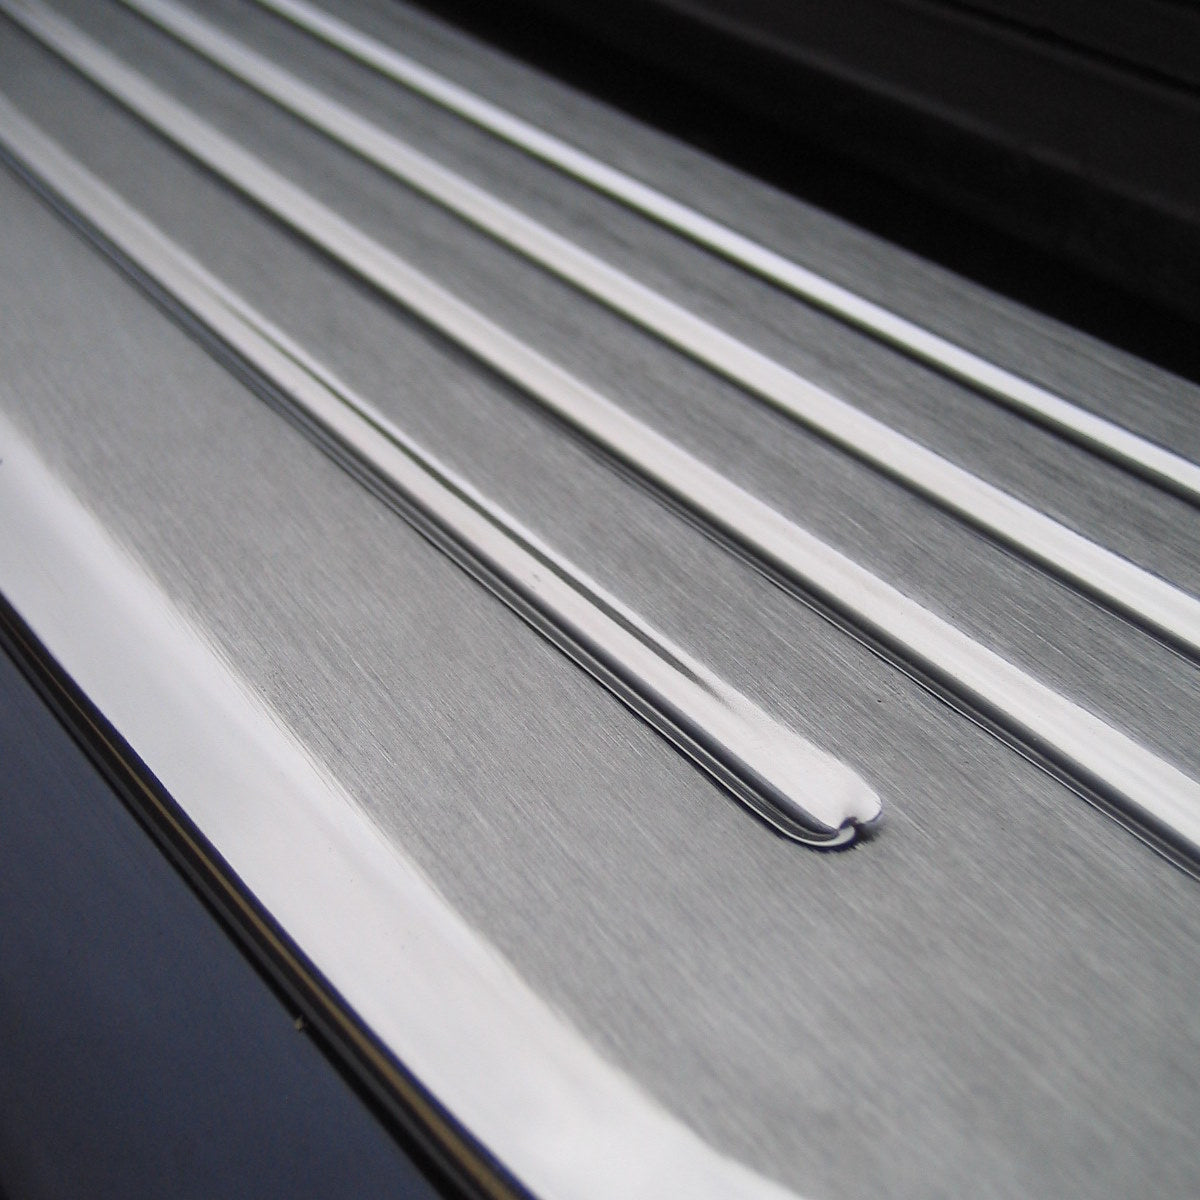 Rear Bumper Step Cover for Range Rover L322 - Brushed Stainless